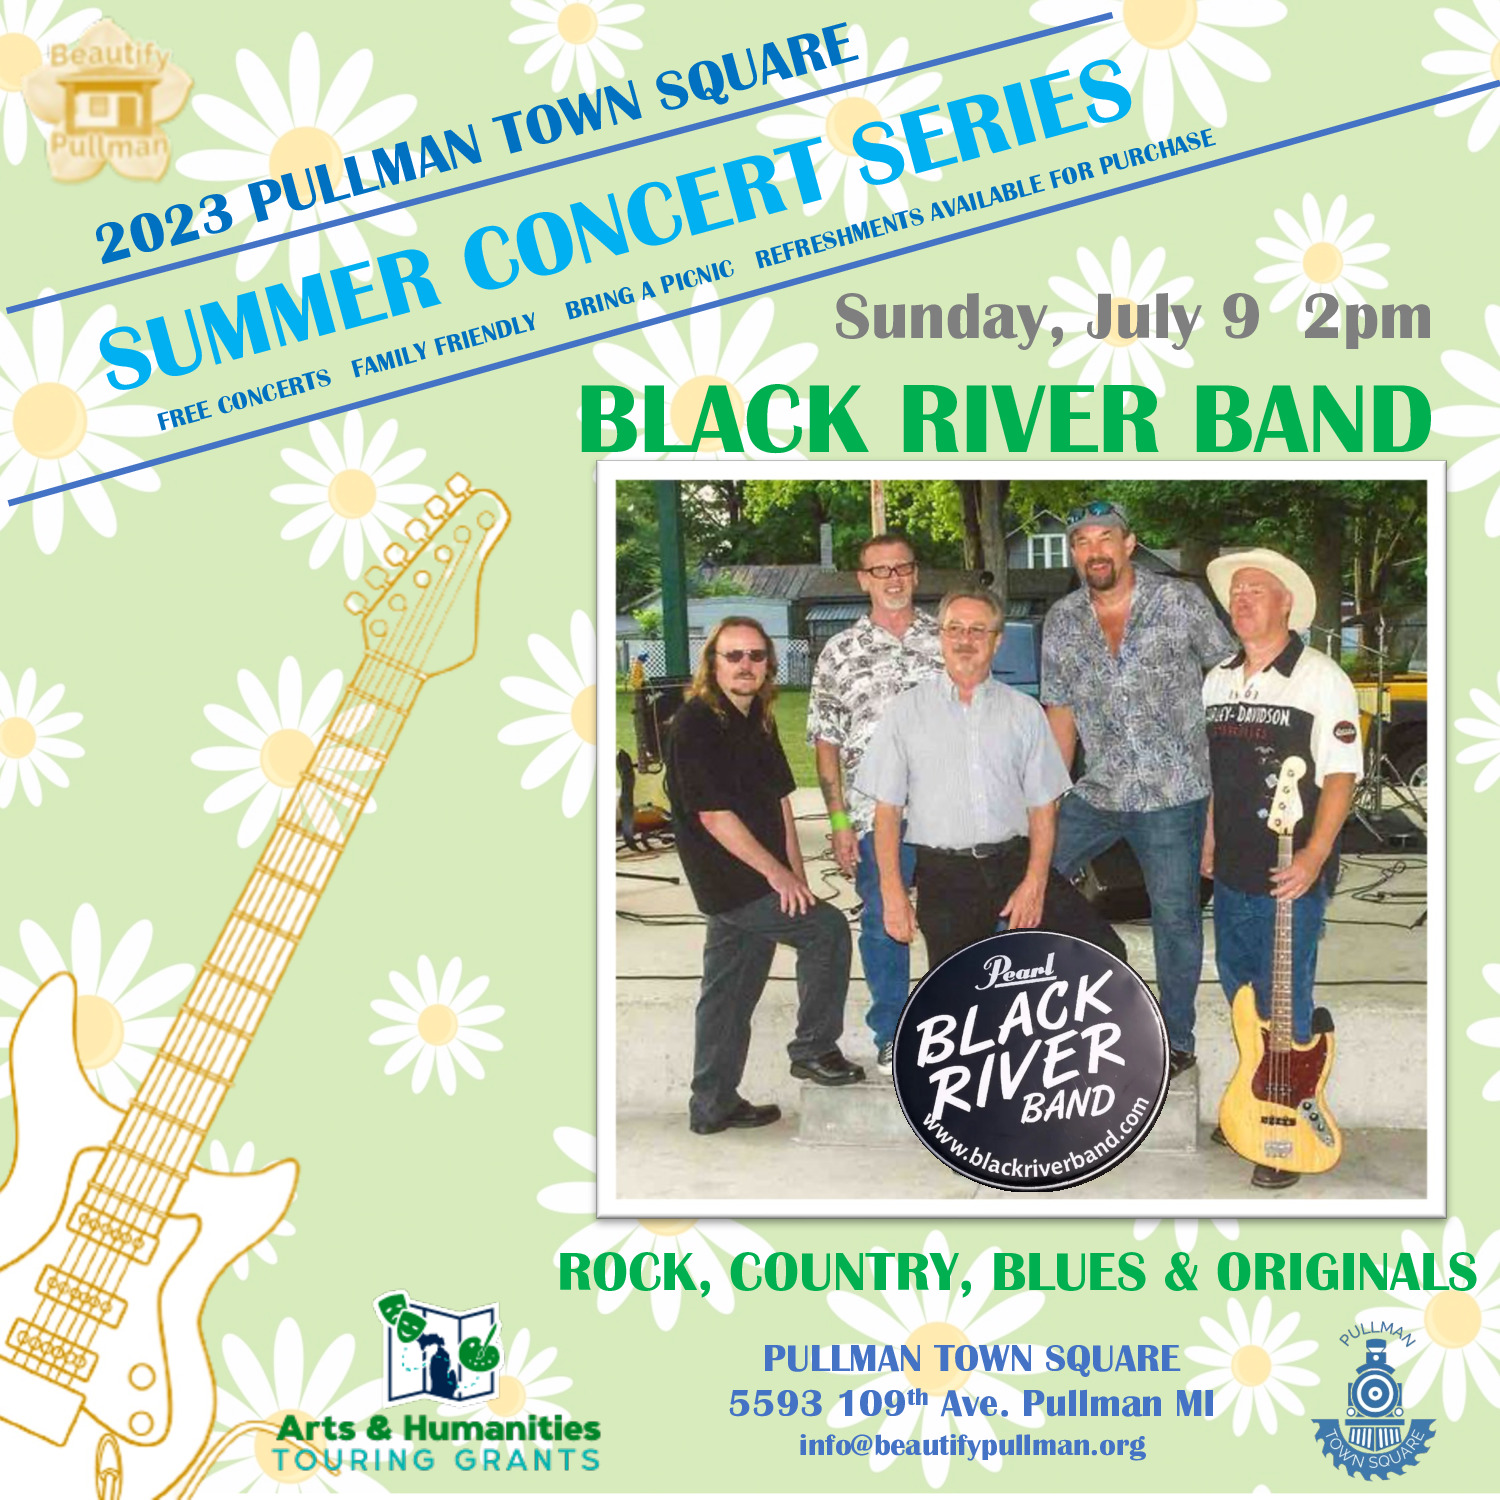 Pullman Square Summer Concert Series Black River Band playing Rock